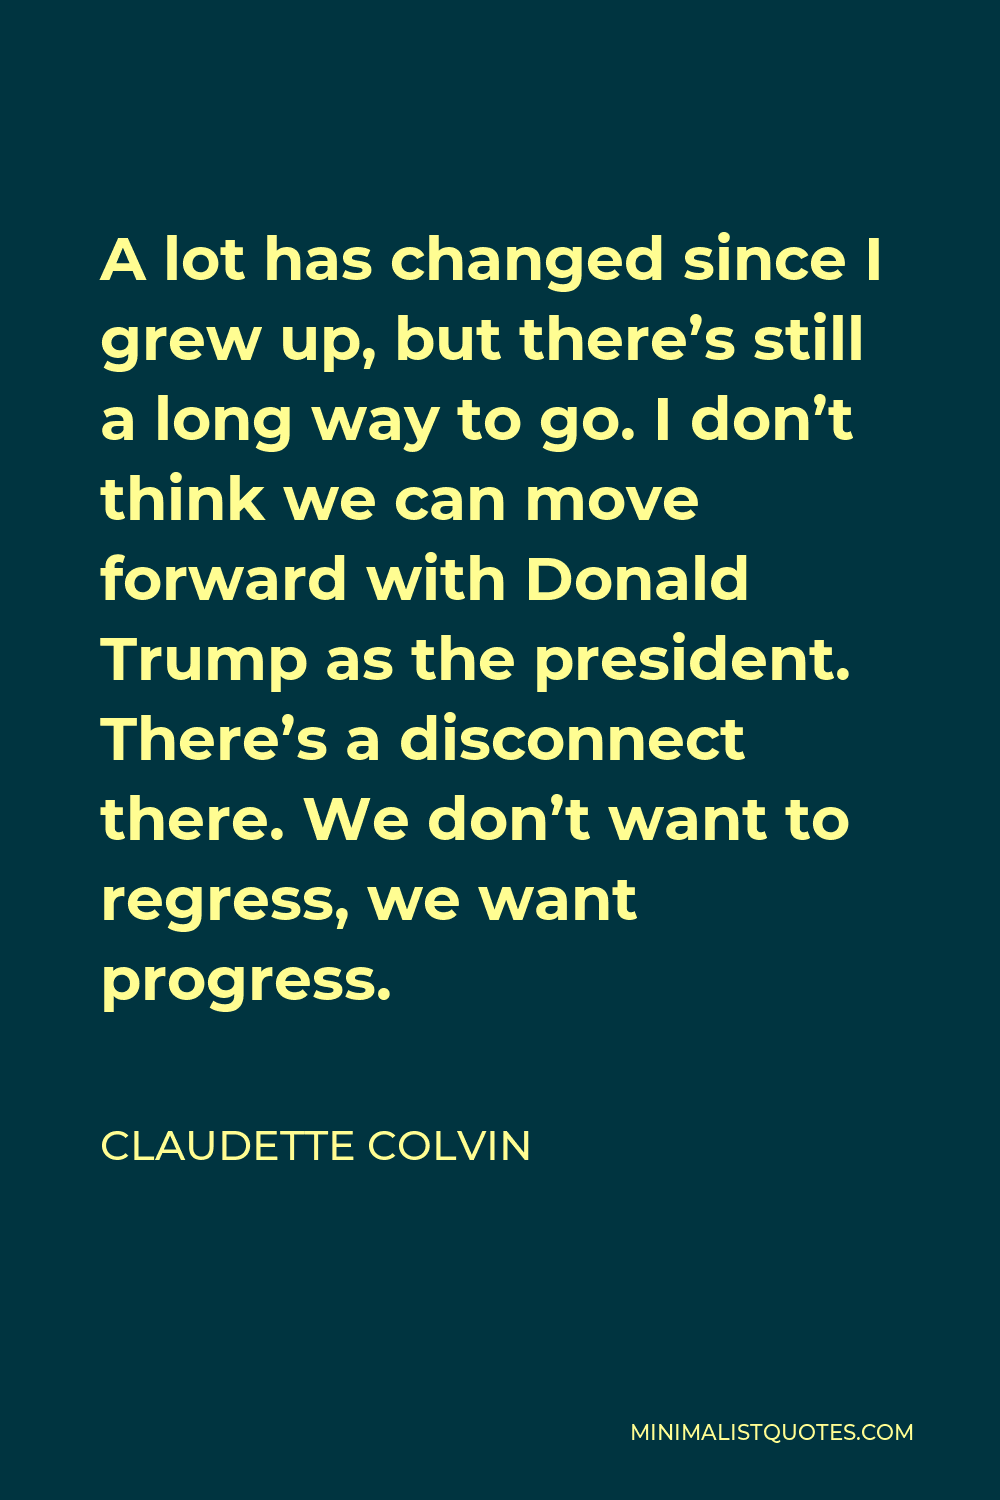 Claudette Colvin Quote - A lot has changed since I grew up, but there’s still a long way to go. I don’t think we can move forward with Donald Trump as the president. There’s a disconnect there. We don’t want to regress, we want progress.